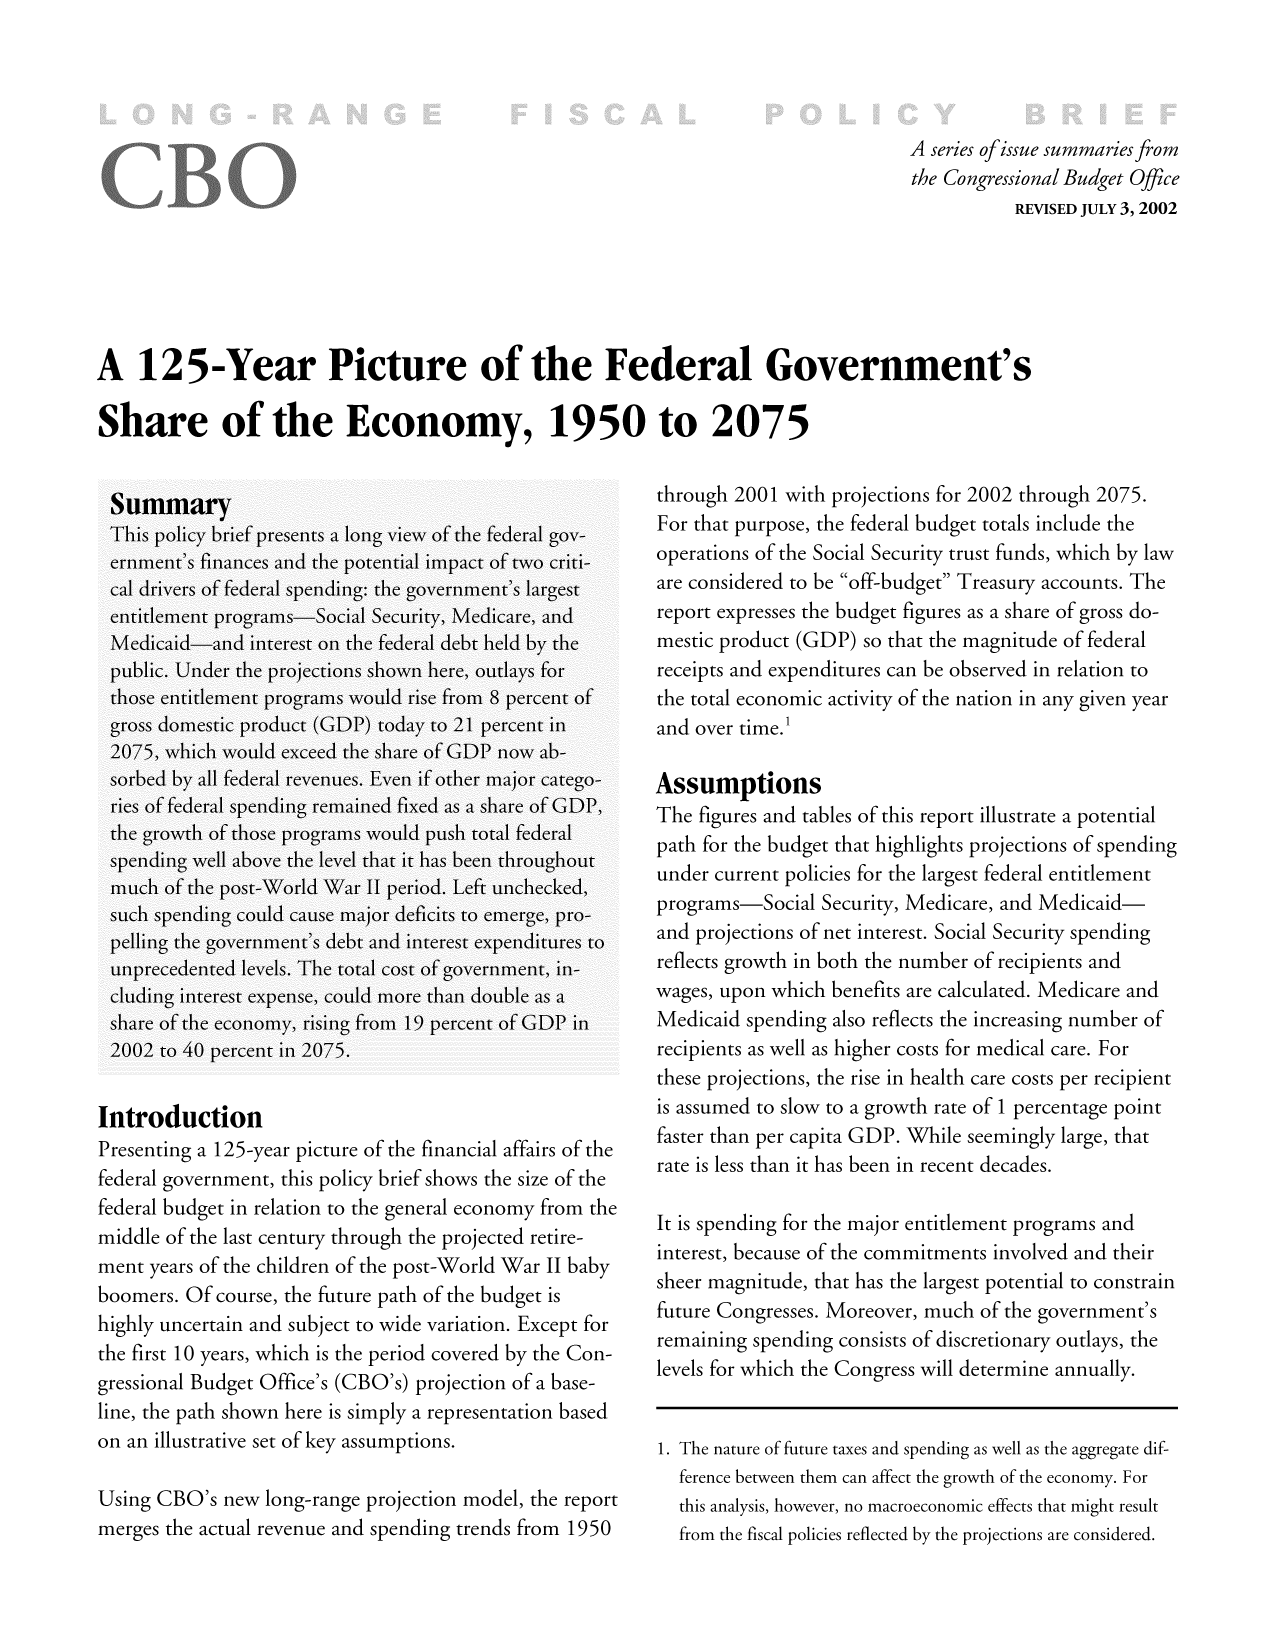 handle is hein.congrec/cbo8620 and id is 1 raw text is: Aseries of issue summaries fo
the Congressional Budget Office
REVISED JULY 3, 2002
A 125-Year Picture of the Federal Government's
Share of the Economy, 1950 to 2075

Introduction
Presenting a 125-year picture of the financial affairs of the
federal government, this policy brief shows the size of the
federal budget in relation to the general economy from the
middle of the last century through the projected retire-
ment years of the children of the post-World War 11 baby
boomers. Of course, the future path of the budget is
highly uncertain and subject to wide variation. Except for
the first 10 years, which is the period covered by the Con-
gressional Budget Office's (CBO's) projection of a base-
line, the path shown here is simply a representation based
on an illustrative set of key assumptions.
Using CBO's new long-range projection model, the report
merges the actual revenue and spending trends from 1950

through 2001 with projections for 2002 through 2075.
For that purpose, the federal budget totals include the
operations of the Social Security trust funds, which by law
are considered to be off-budget Treasury accounts. The
report expresses the budget figures as a share of gross do-
mestic product (GDP) so that the magnitude of federal
receipts and expenditures can be observed in relation to
the total economic activity of the nation in any given year
and over time.'1
Assumptions
The figures and tables of this report illustrate a potential
path for the budget that highlights projections of spending
under current policies for the largest federal entitlement
programs-Social Security, Medicare, and Medicaid-
and projections of net interest. Social Security spending
reflects growth in both the number of recipients and
wages, upon which benefits are calculated. Medicare and
Medicaid spending also reflects the increasing number of
recipients as well as higher costs for medical care. For
these projections, the rise in health care costs per recipient
is assumed to slow to a growth rate of 1 percentage point
faster than per capita GDP. W~Xhile seemingly large, that
rate is less than it has been in recent decades.
It is spending for the major entitlement programs and
interest, because of the commitments involved and their
sheer miagnitude, that has tihe largest potenltial to conistraini
future Congresses. Moreover, much of the government's
remaining spending consists of discretionary outlays, the
levels for which the Congress will determine annually.
1. The nature of future taxes and spending as well as the aggregate dif-
ference between them can affect the growth of the economy. For
this analysis, however, no macroeconomic effects that might result
from the fiscal policies reflected by the projections are considered.


